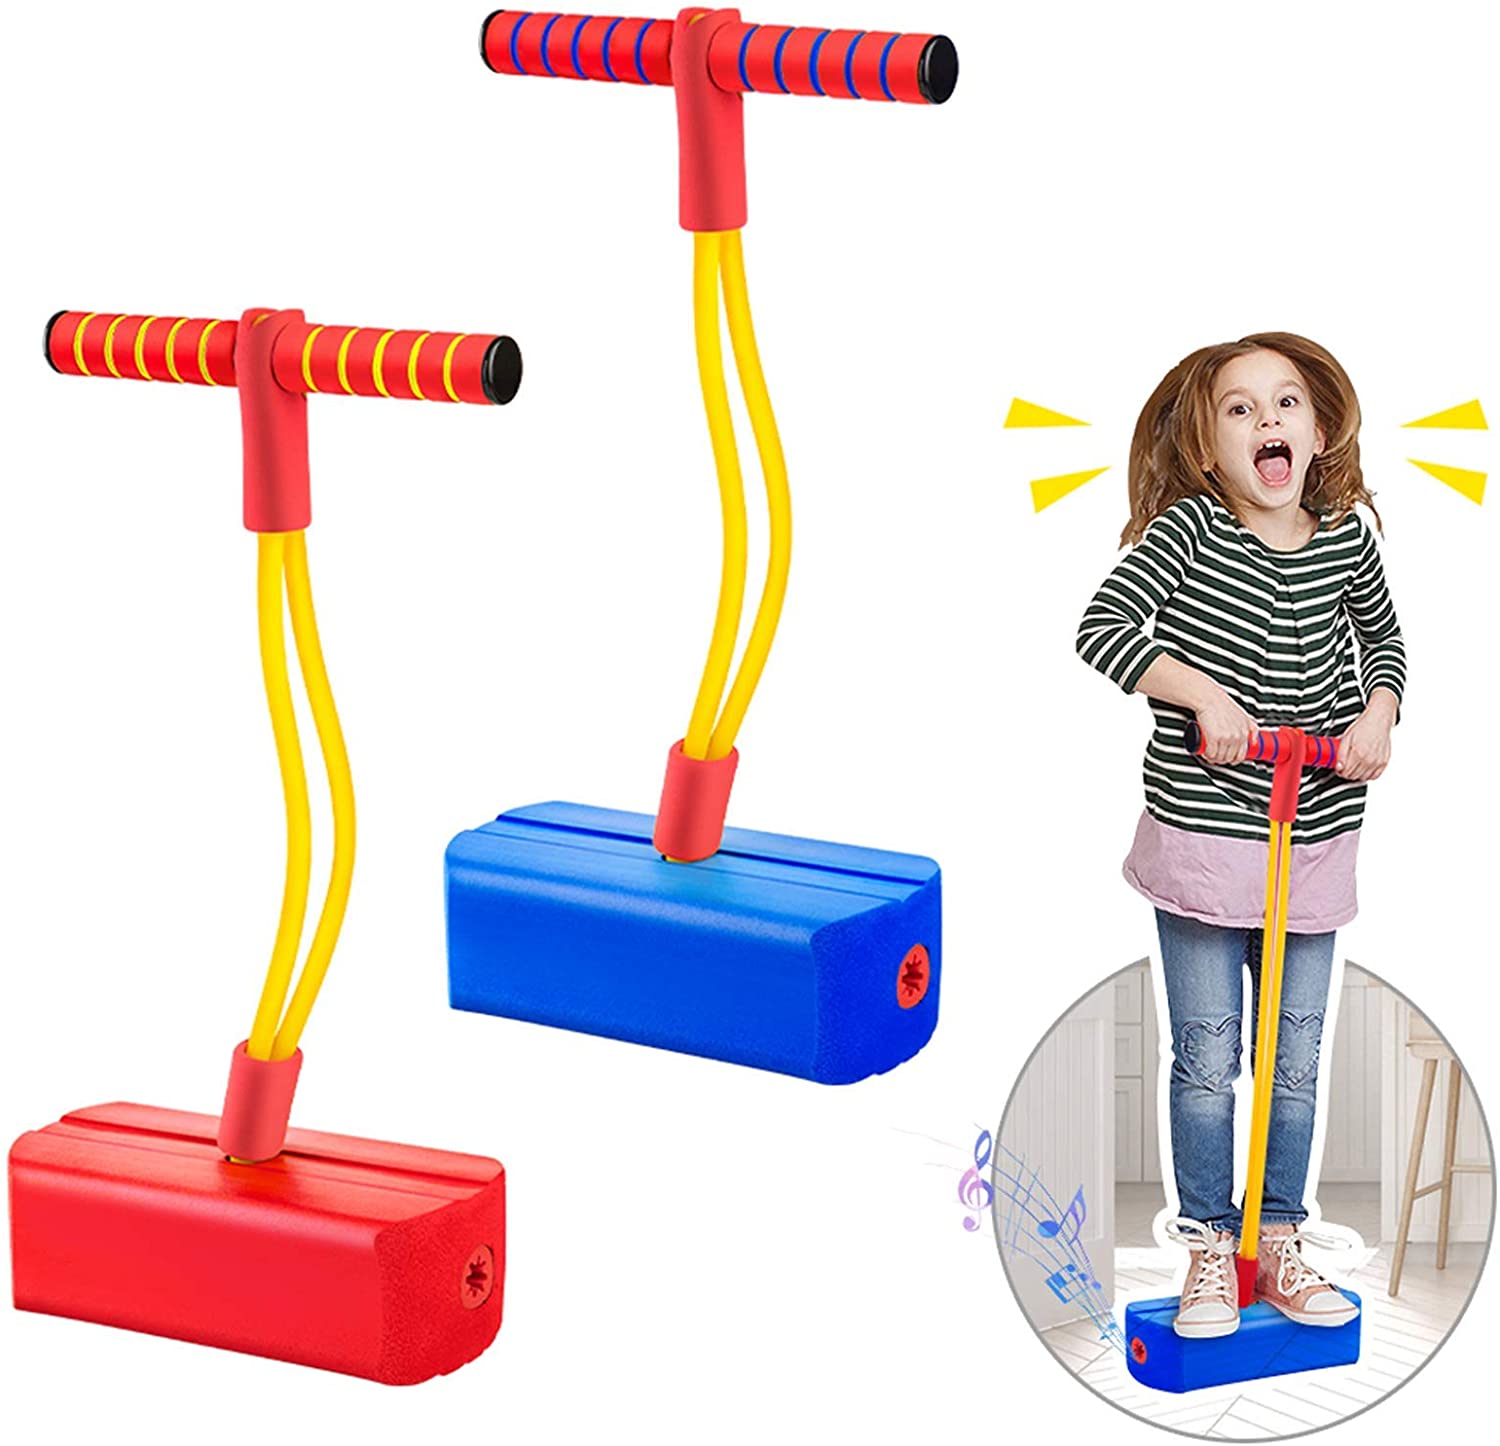 New Bounce Pogo Stick for Kids - Foam Pogo Jumper for Boys and Girls Ages 3 to 5 Years -100% Safe, Bouncy Toy for Toddlers, Squeaks with Each Hop